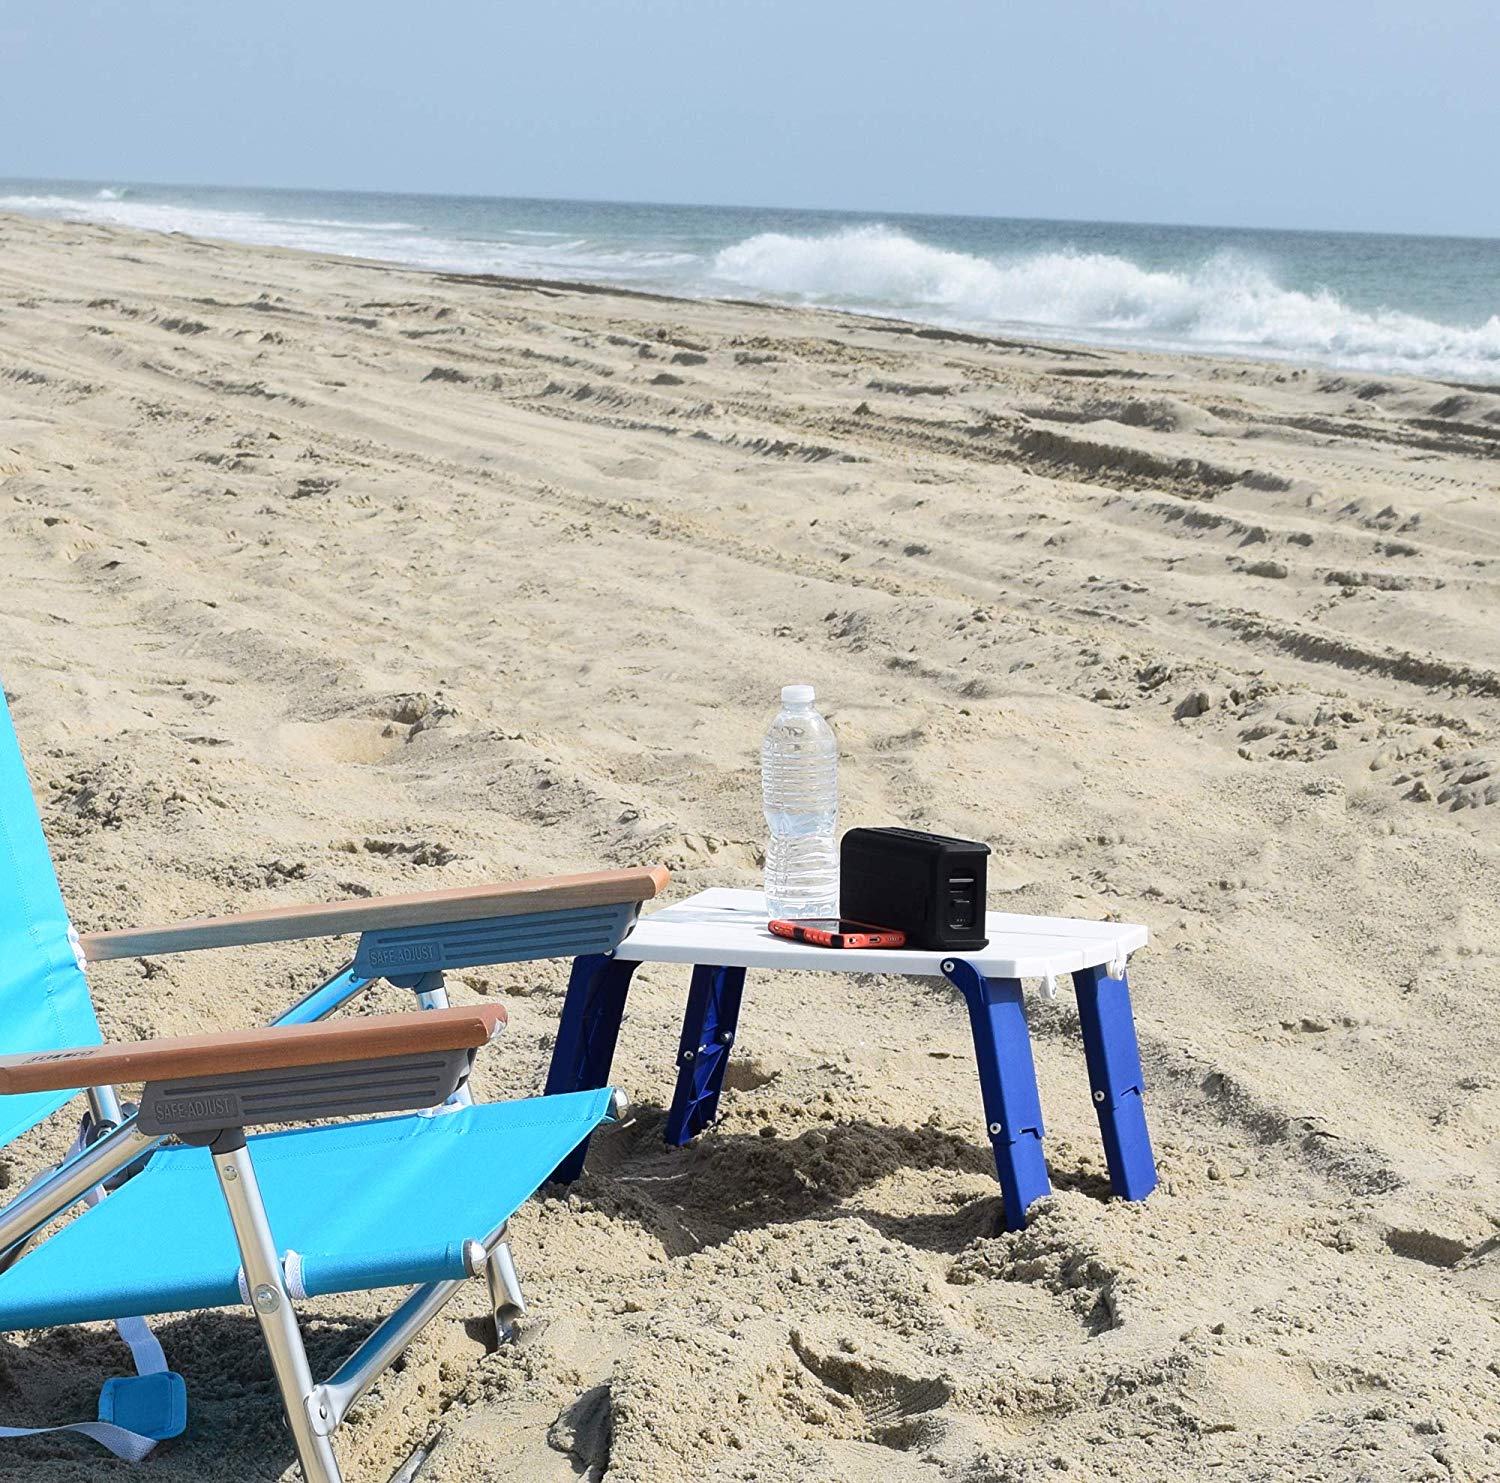 This handy beach cart turns into a table